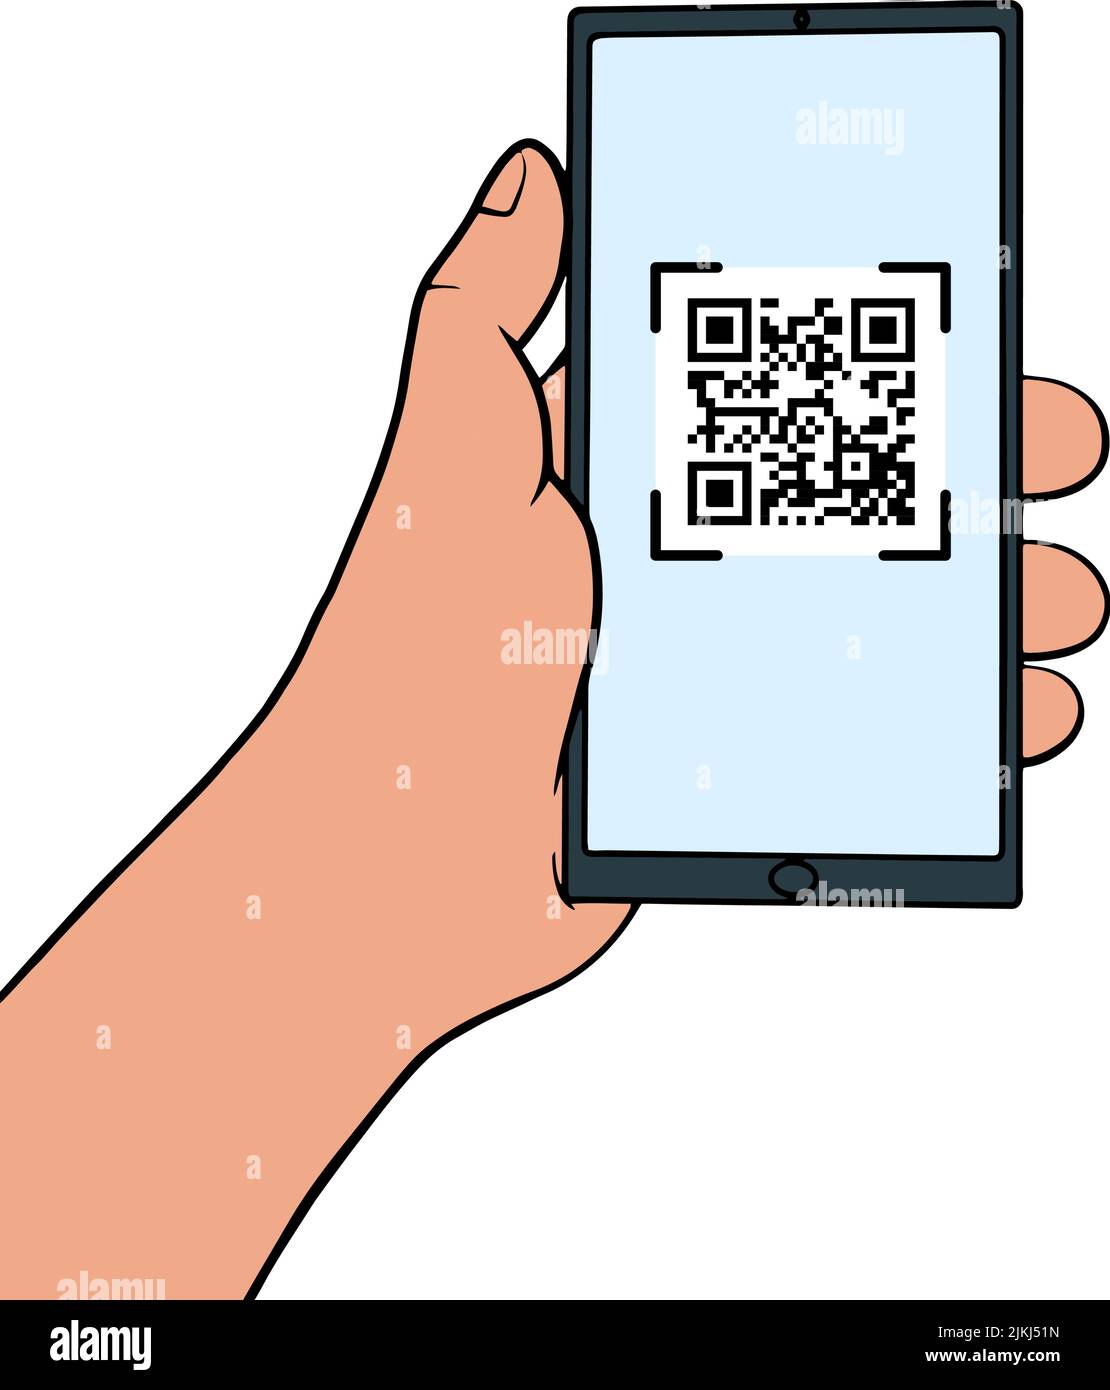 Hand holding a mobile phone with QR code on the screen. QR code scanning in smartphone in line style. Barcode scanner for pay, web, app, promo. Vector illustration. Stock Vector